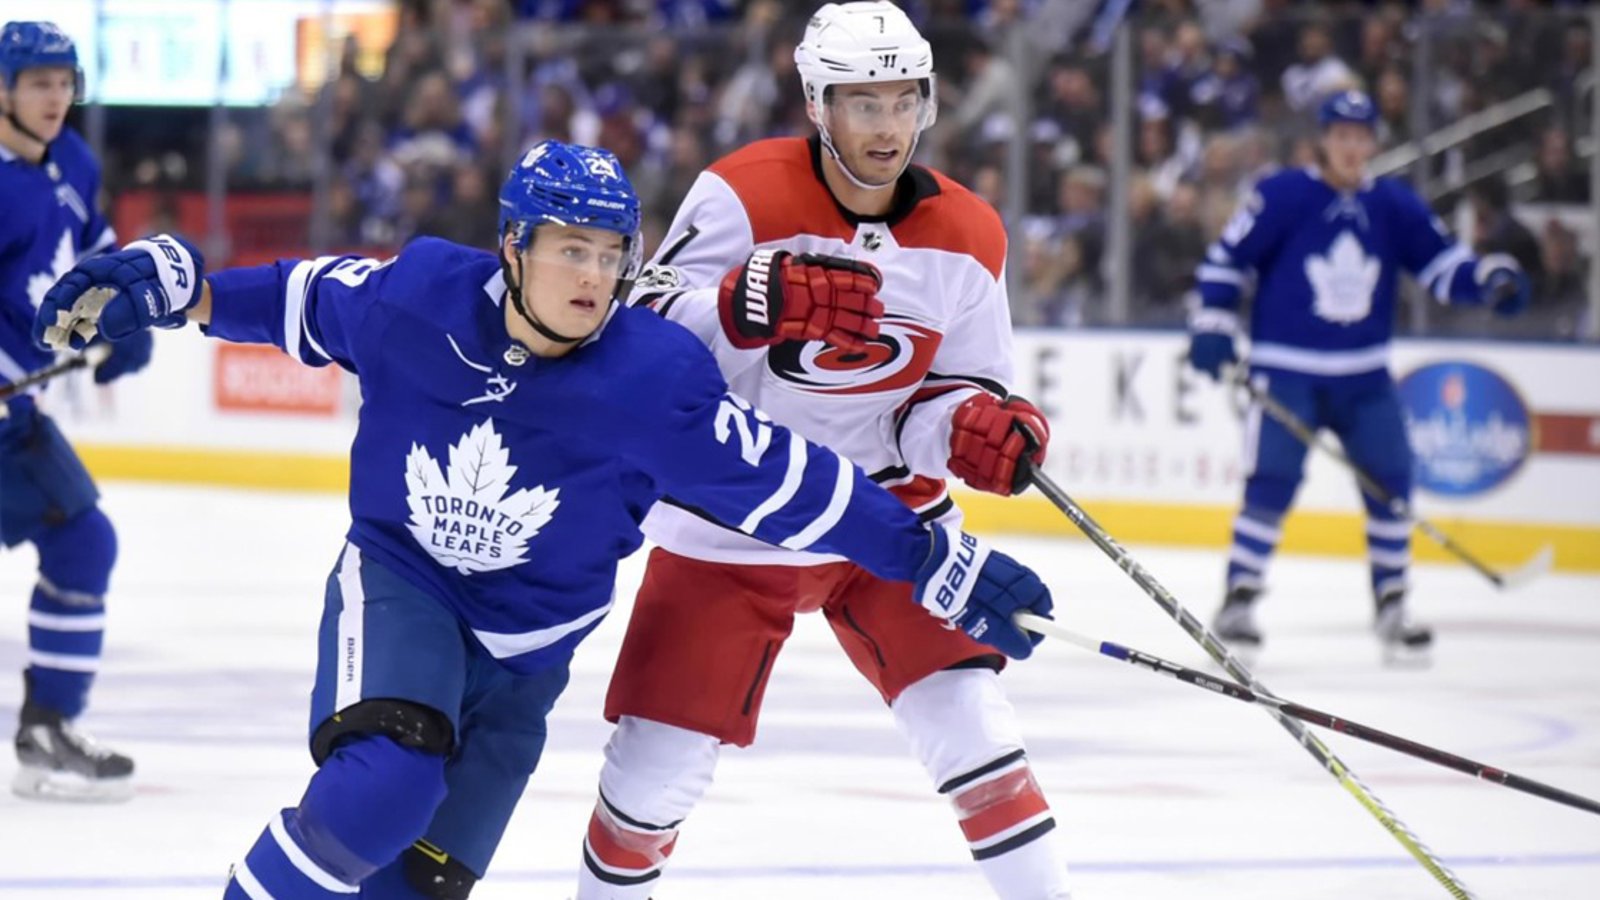 Hurricanes GM Waddell comments on acquiring Nylander from Leafs